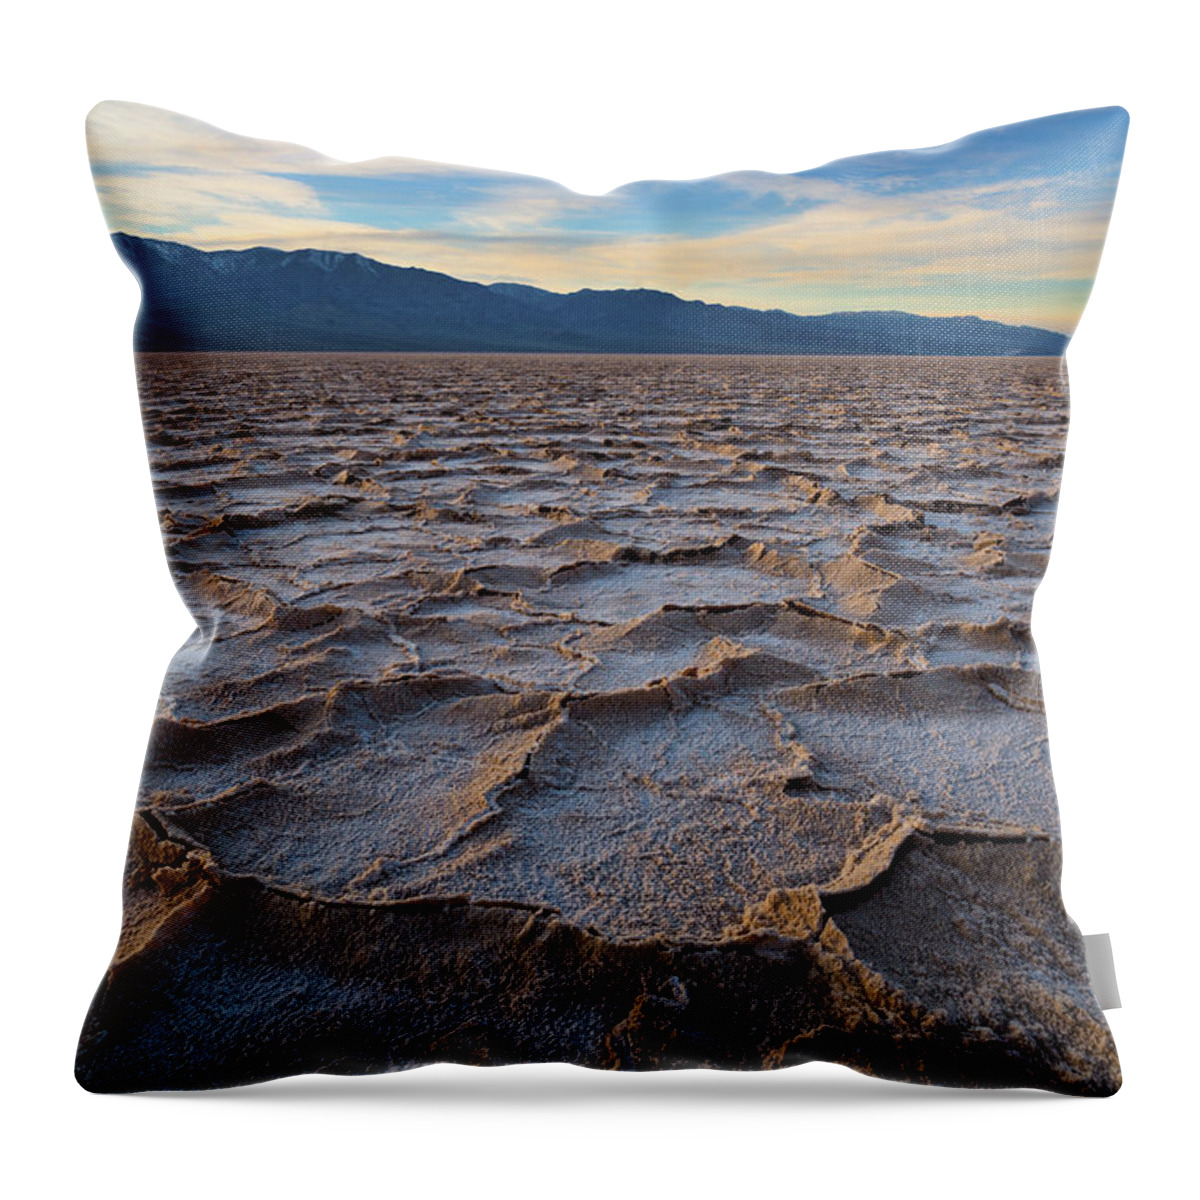 Scenics Throw Pillow featuring the photograph Usa, California, Death Valley, Salt Pan by Gary Weathers